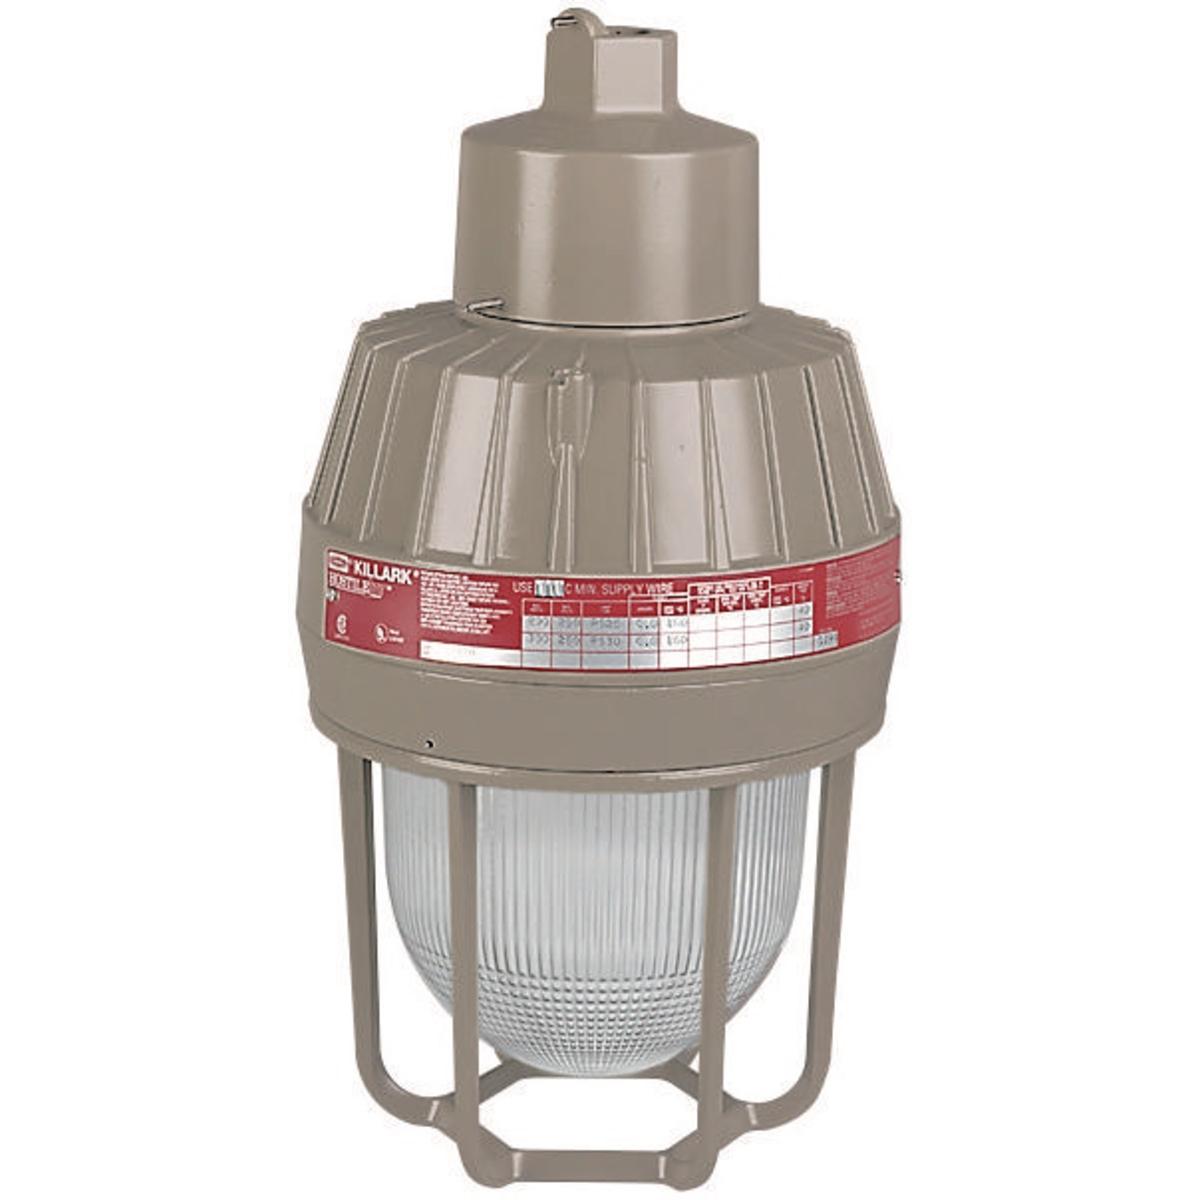 Hubbell EMS050A2G HID 50W HPS Quadri-Volt 3/4" Pendant with Guard  ; Four light sources—Incandescent, compact fluorescent, high pressure sodium and metal halide ; Mounting choice—Pendant, ceiling, 25˚ stanchion or 90˚ wall mount, all with “wireless” design that allows fast